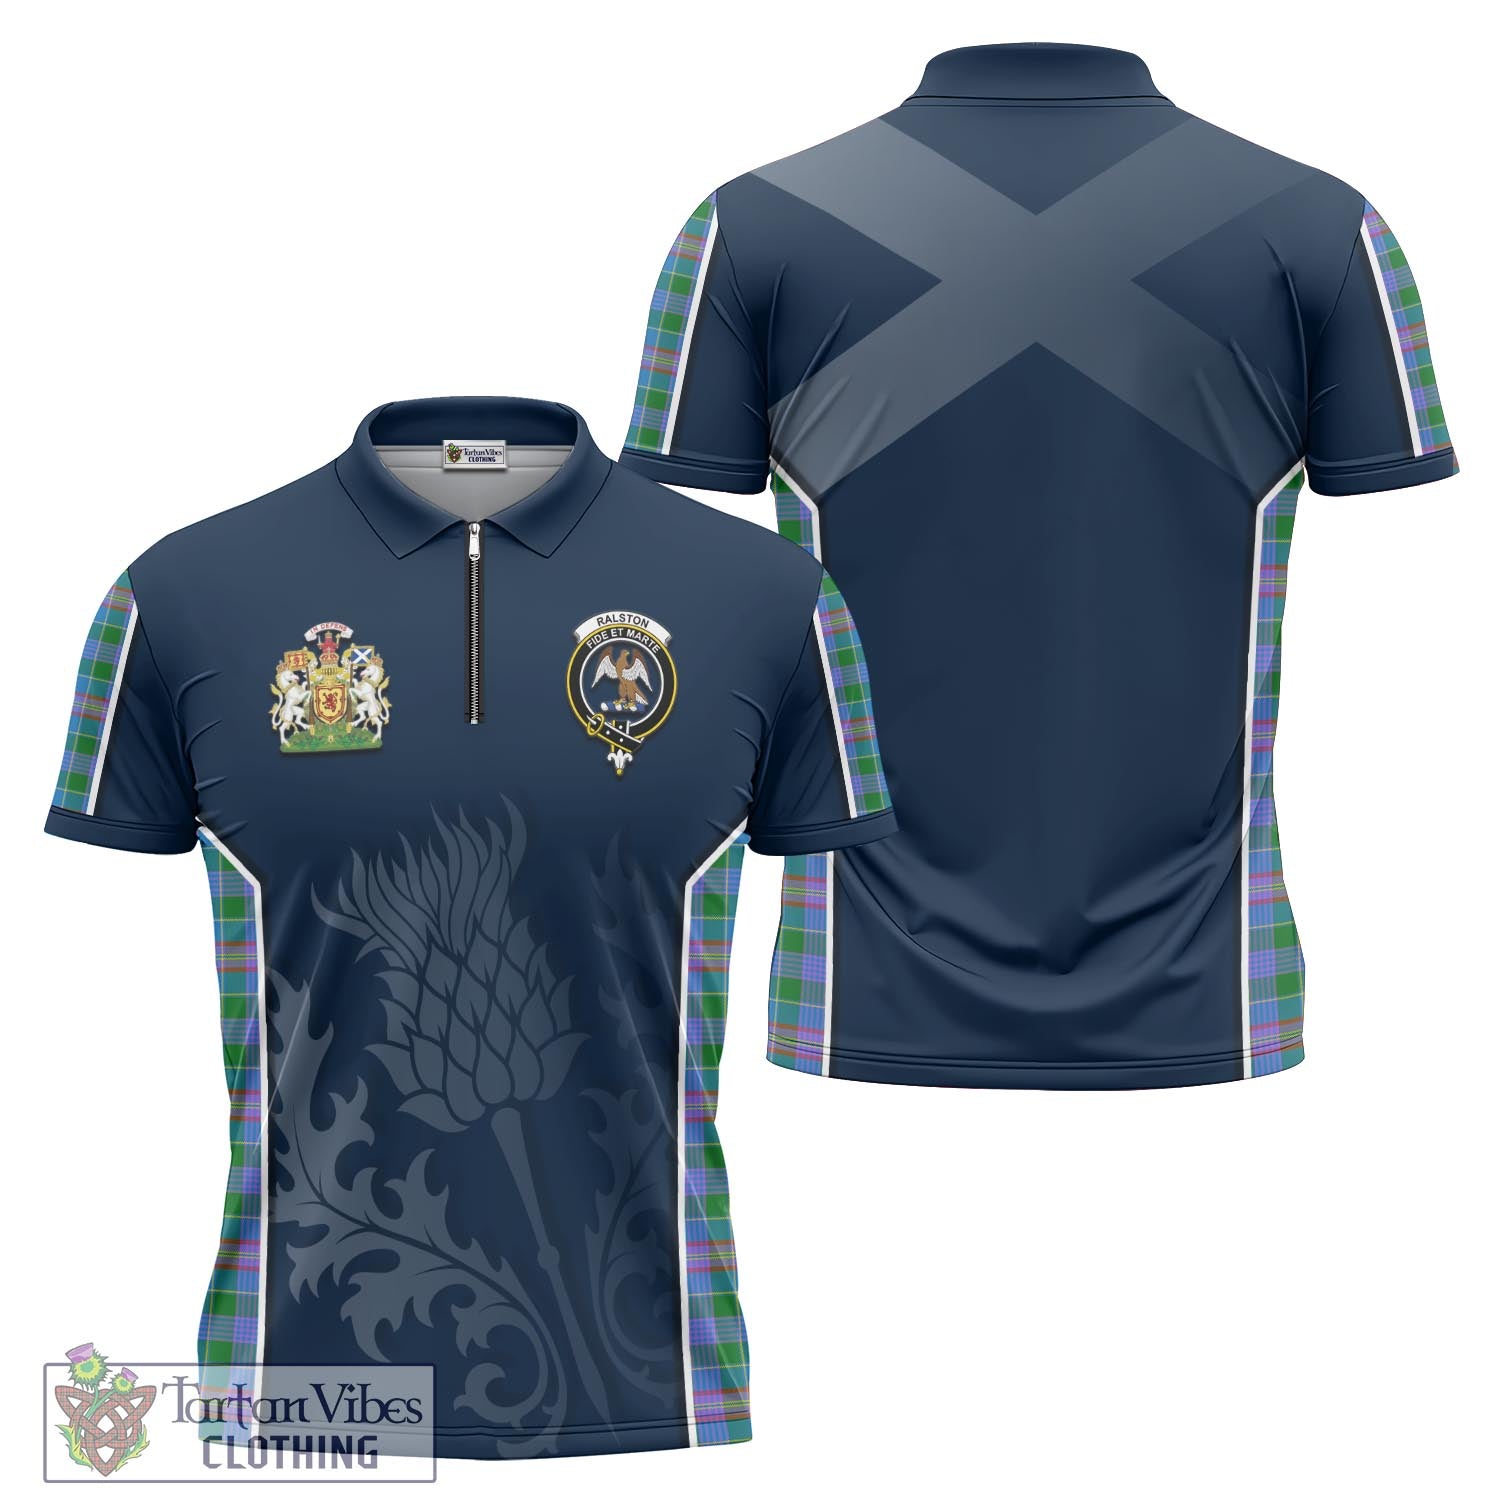 Tartan Vibes Clothing Ralston Tartan Zipper Polo Shirt with Family Crest and Scottish Thistle Vibes Sport Style